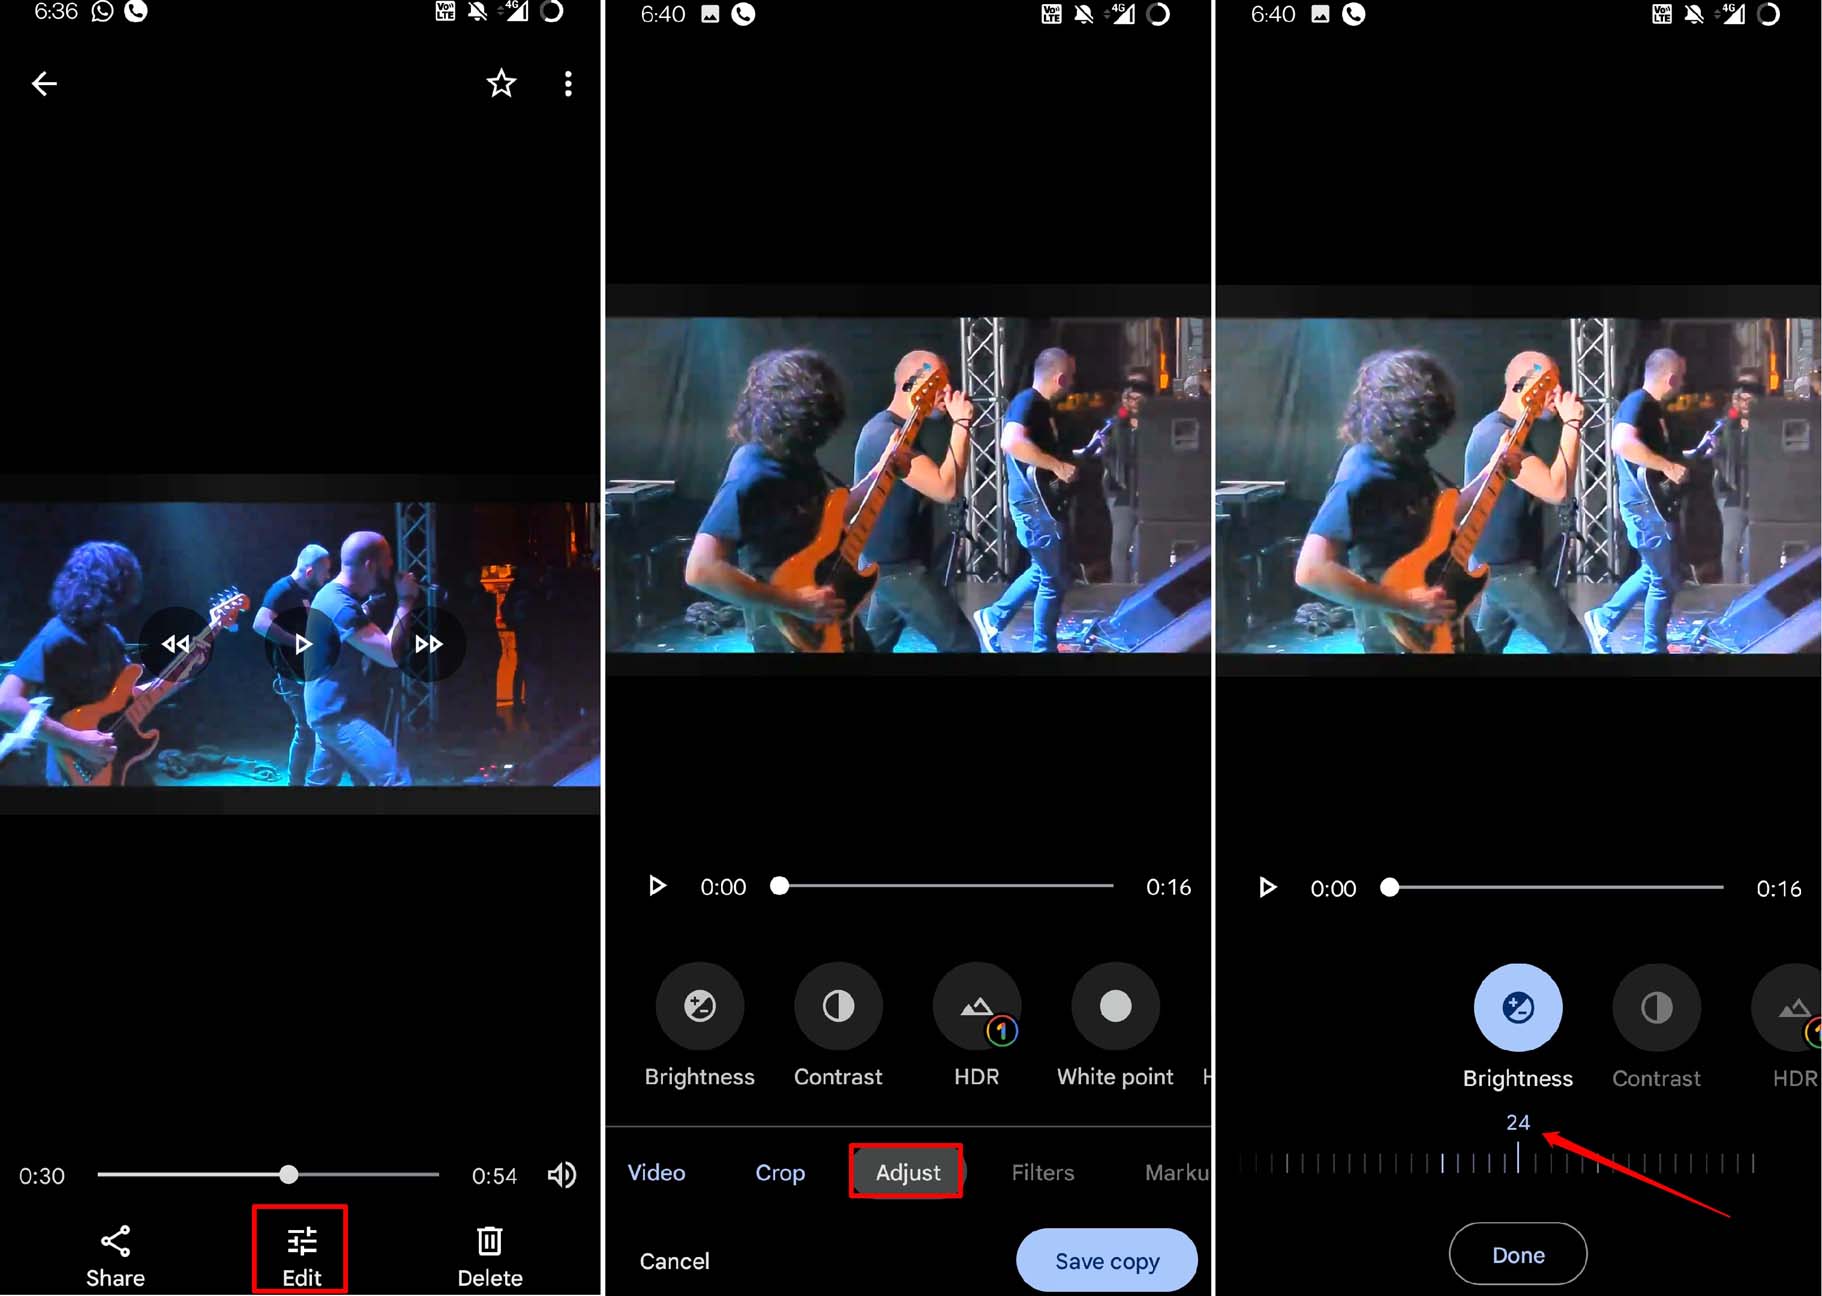 adjust brightness and contrast in a video in Google Photos